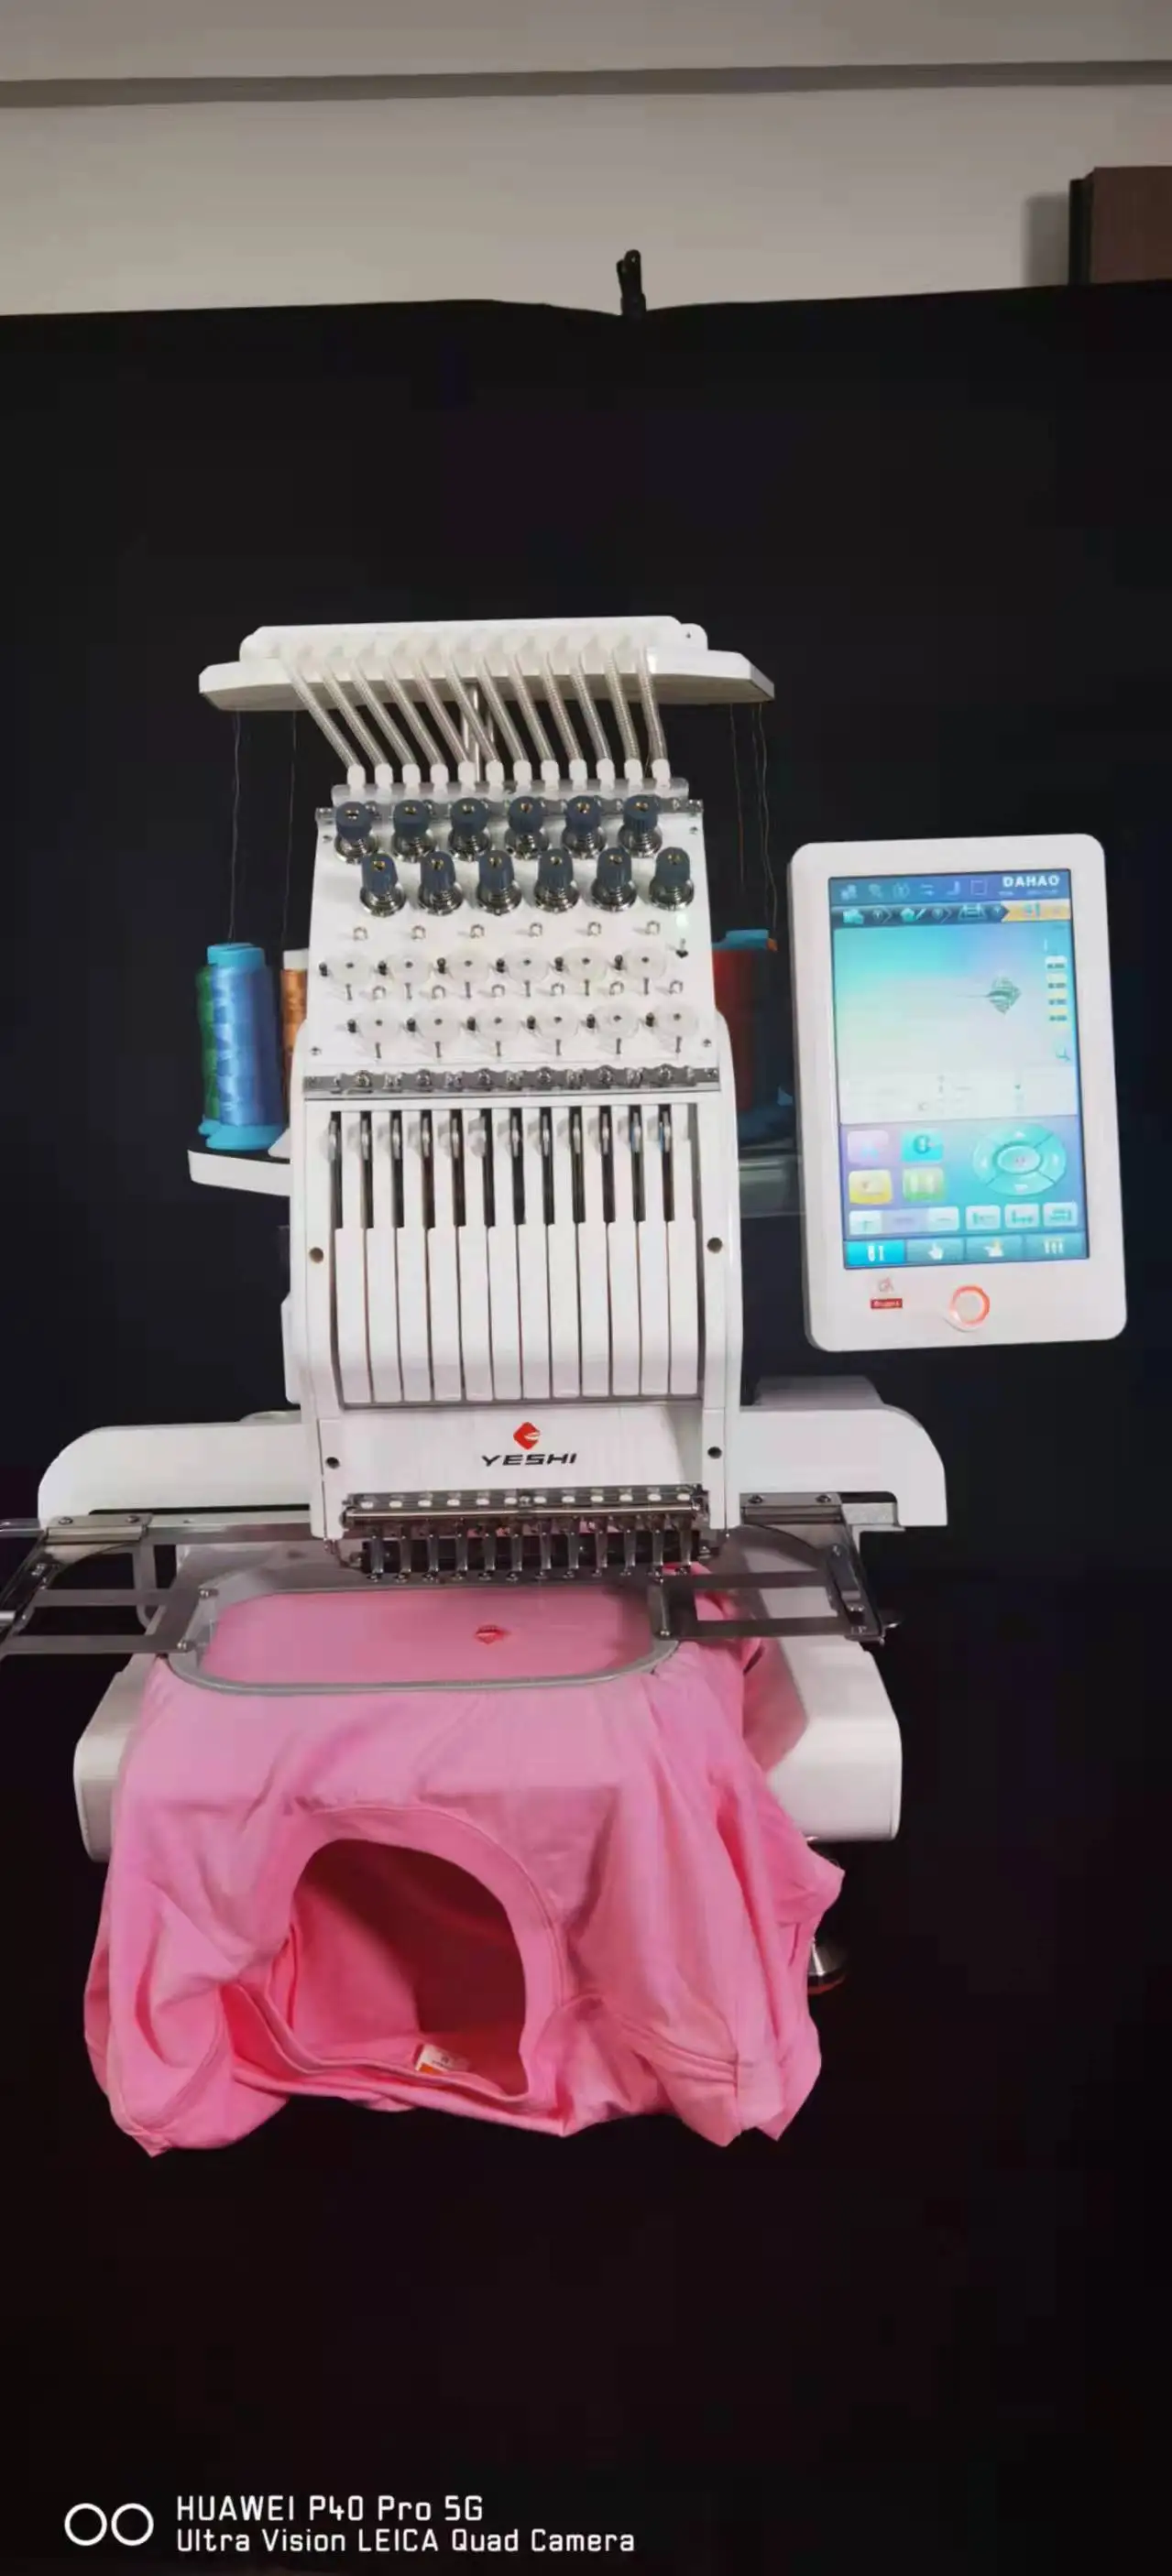 Lifetime service! Yeshi Cheap and fine single head computer embroidery machine hat t shirt flat embroidery factory made in China